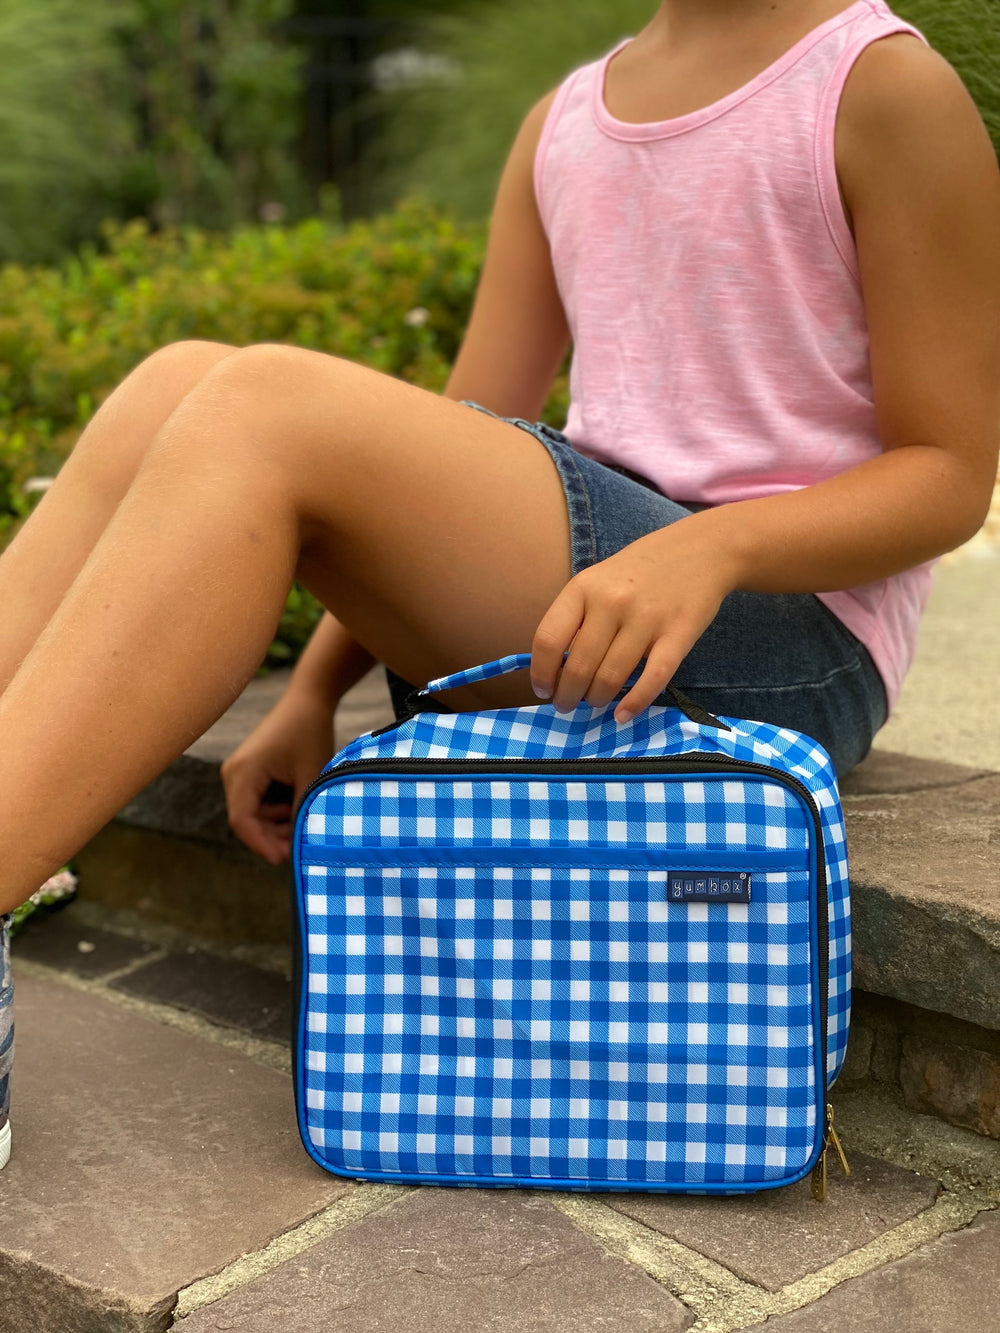 Yumbox Poche - Insulated Lunch Bag Sleeve with Handles - Zesty